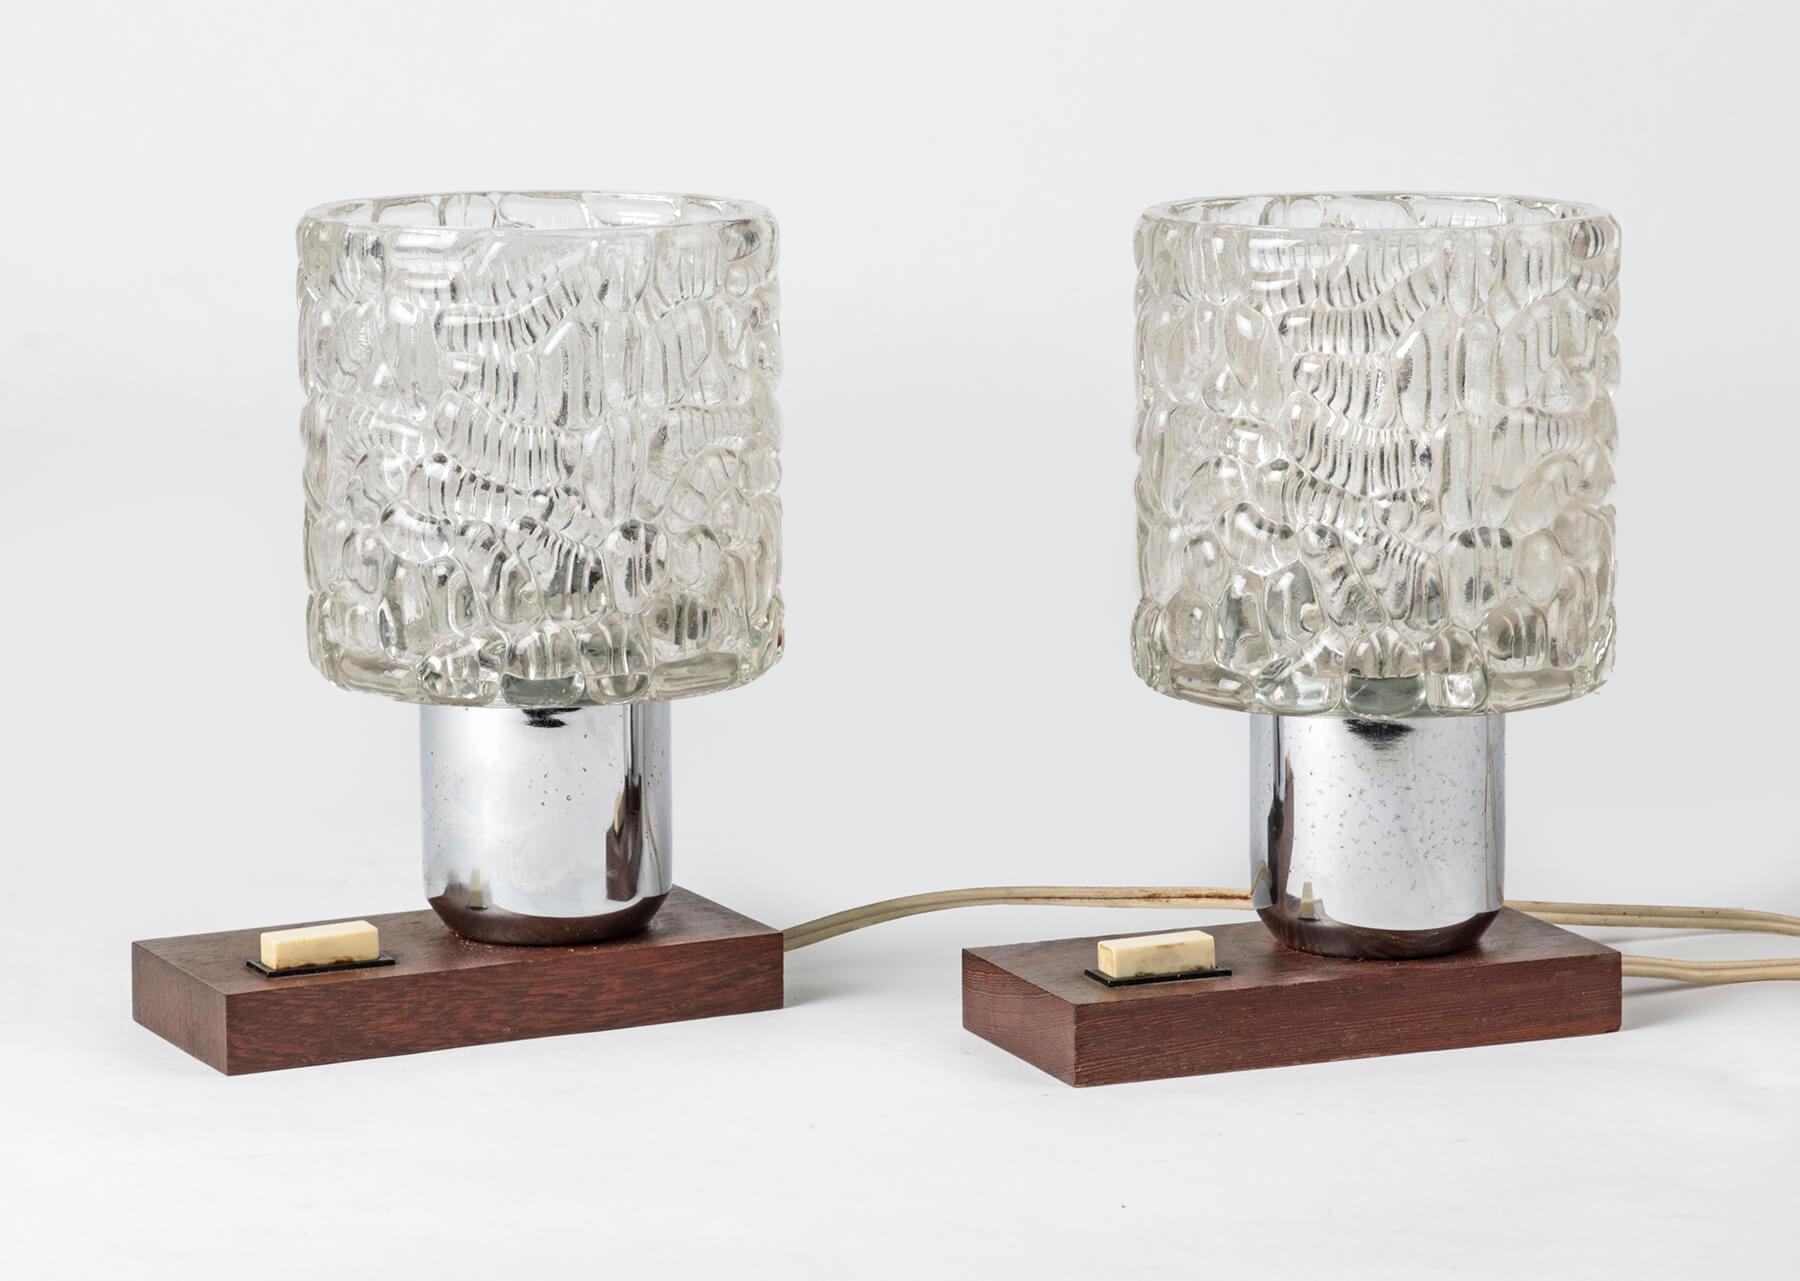 This nice couple of lamps has a modern design from the 1960s or 1970s of the last century. The caps are made of glass and have a relief decoration, which gives a nice effect when the lamps are on. The feet are made of mahogany wood. The lamps are in